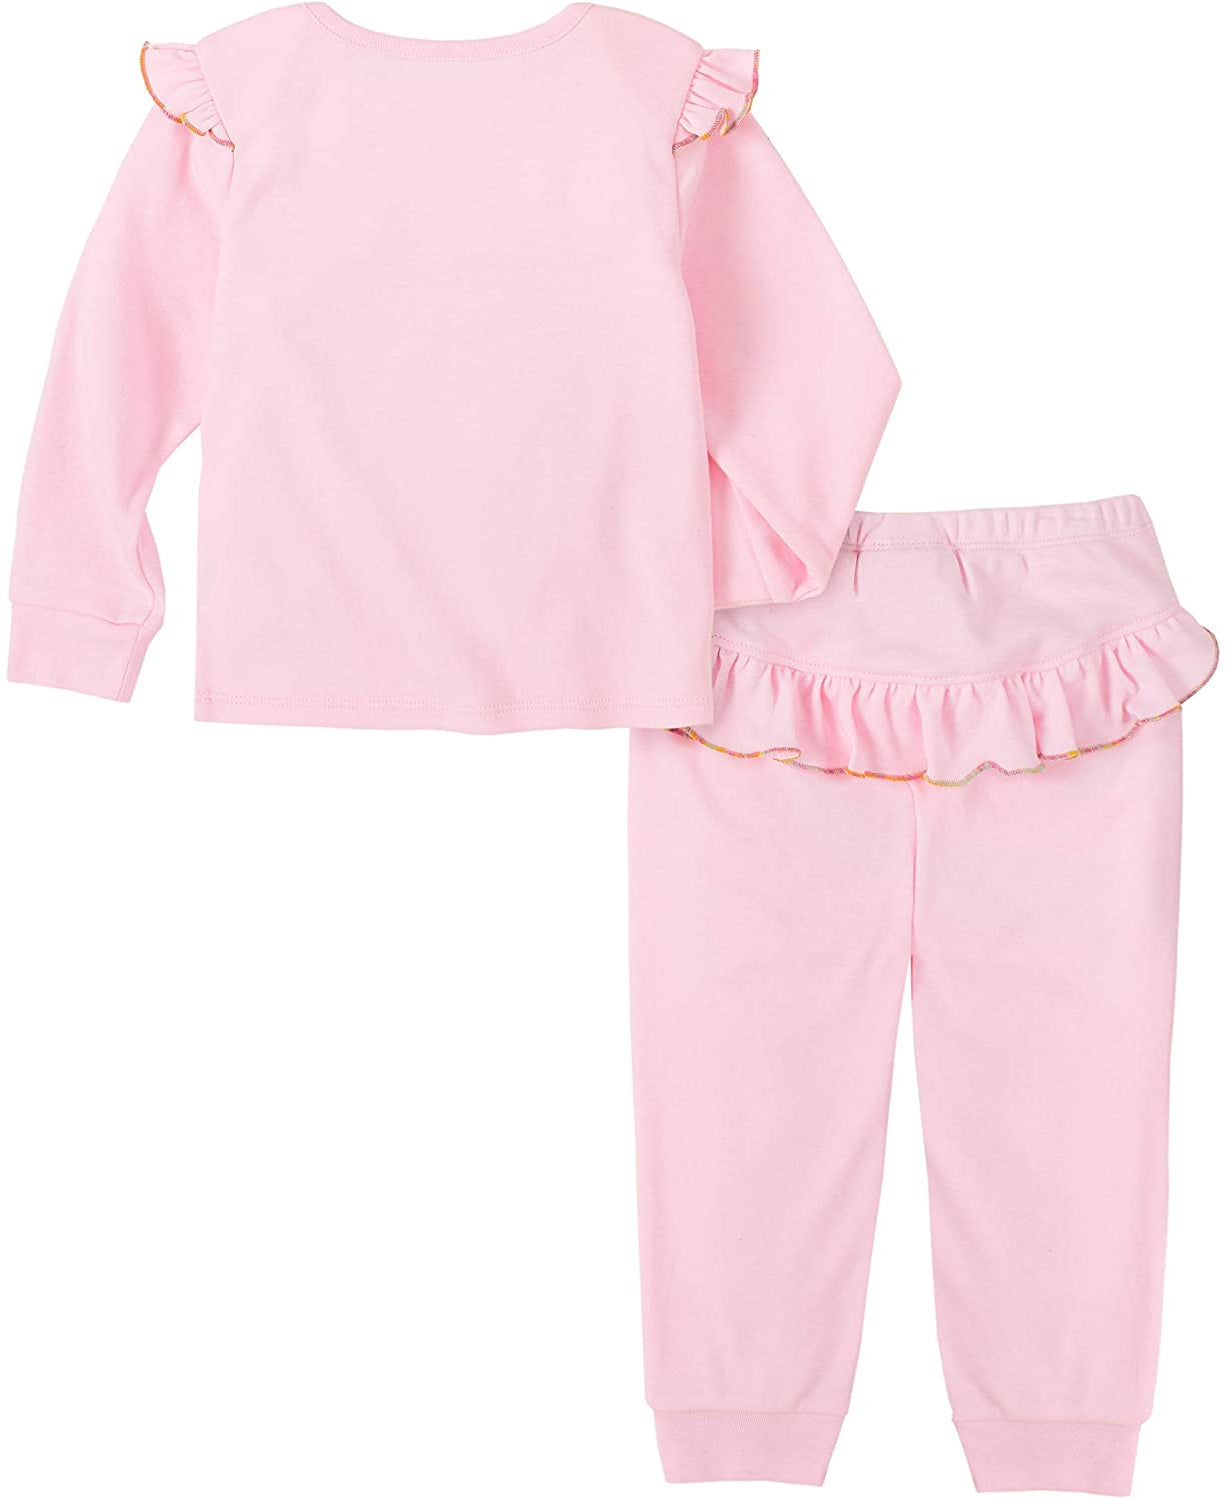 Juicy Couture Girls 0-9 Months Crown Ruffle Pant Set